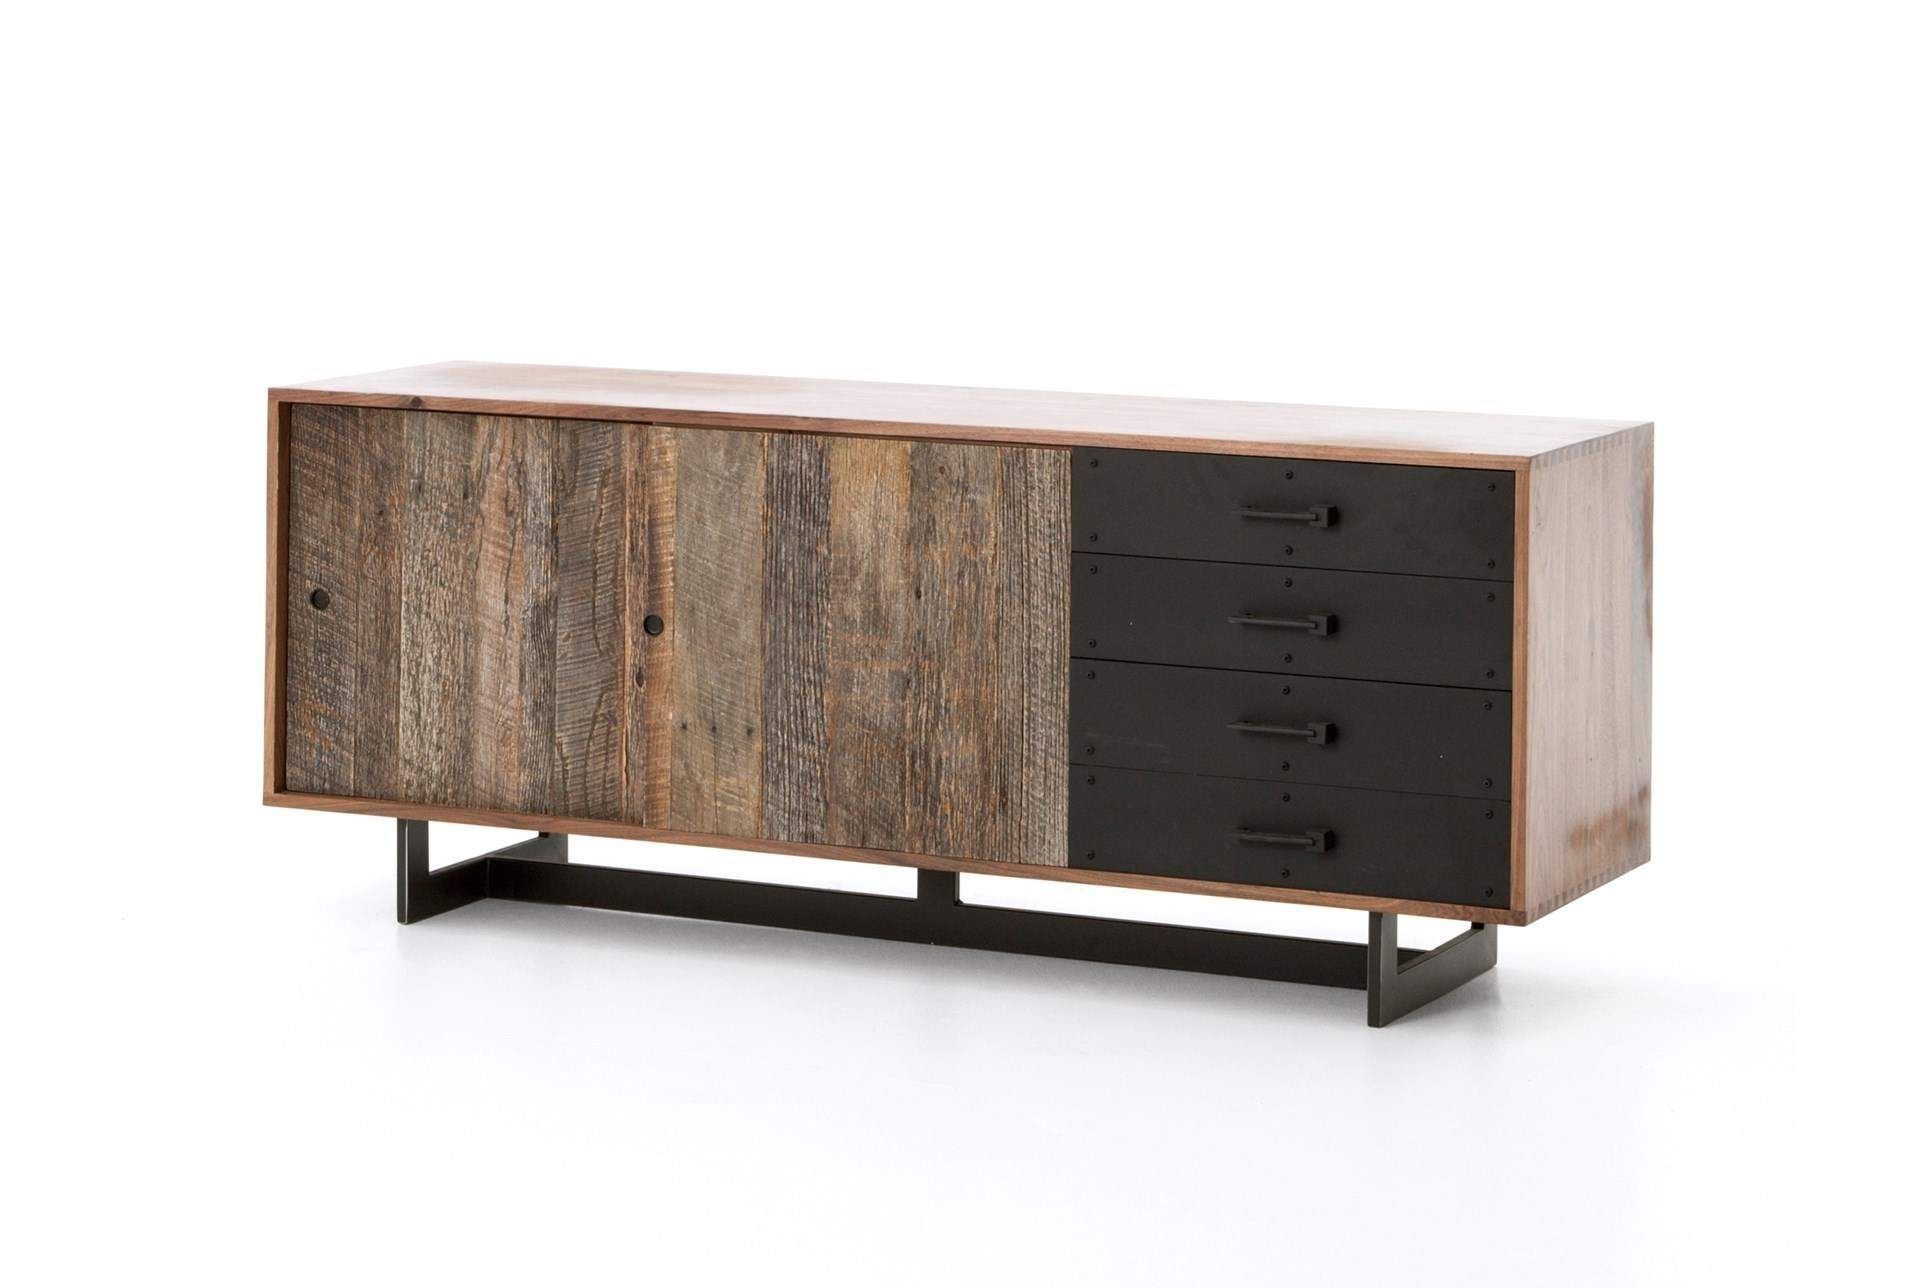 Shop For Mikelson Sideboard At Livingspaces (View 1 of 30)